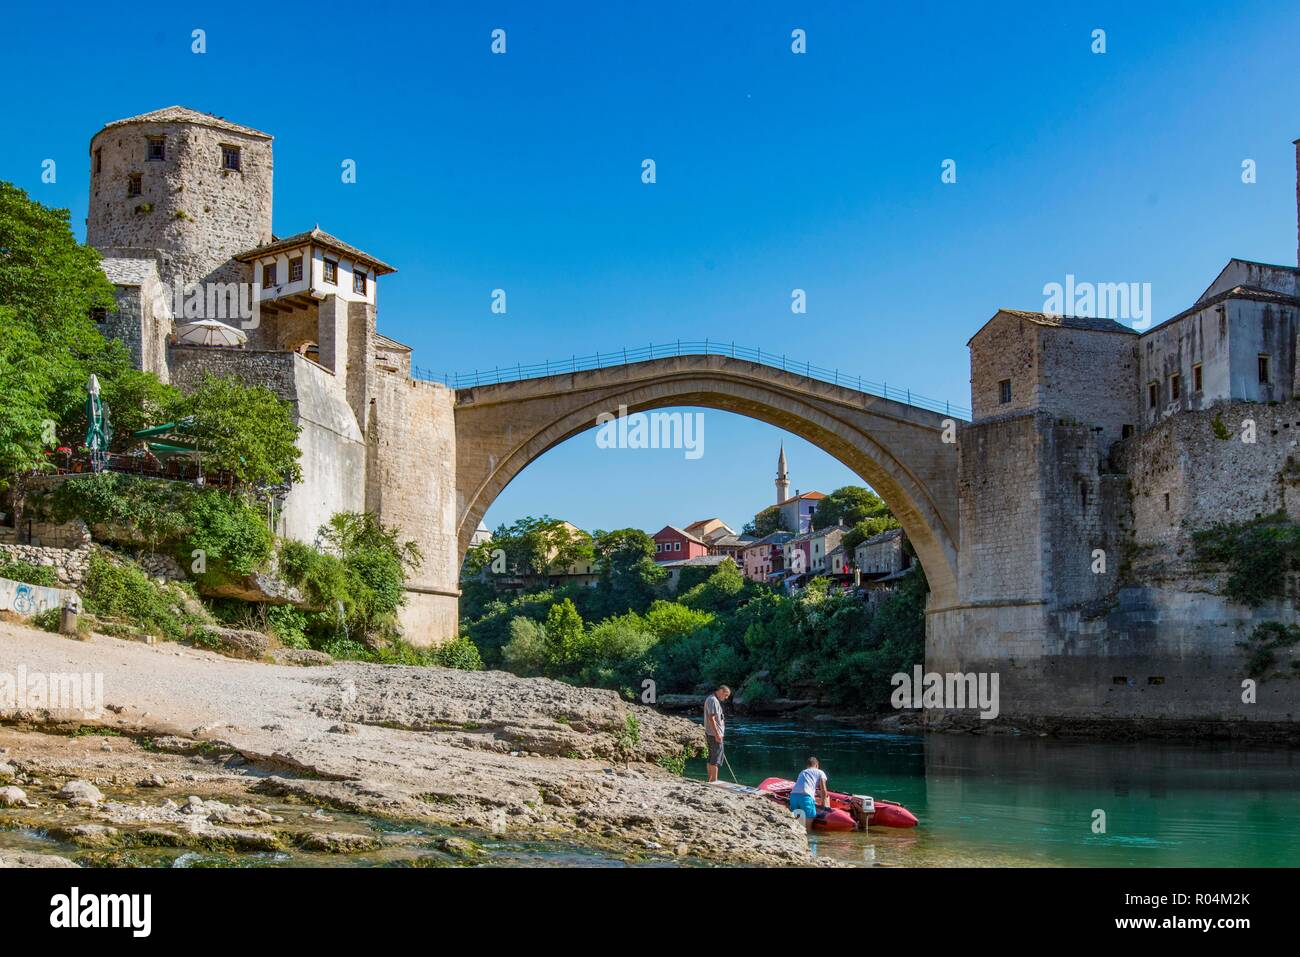 BOSNIA-HERZEGOVINA, MOSTAR. The famous bridge, a UNESCO world heritage site, was rebuilt after its destruction during the war 1991-1999 and is again a Stock Photo